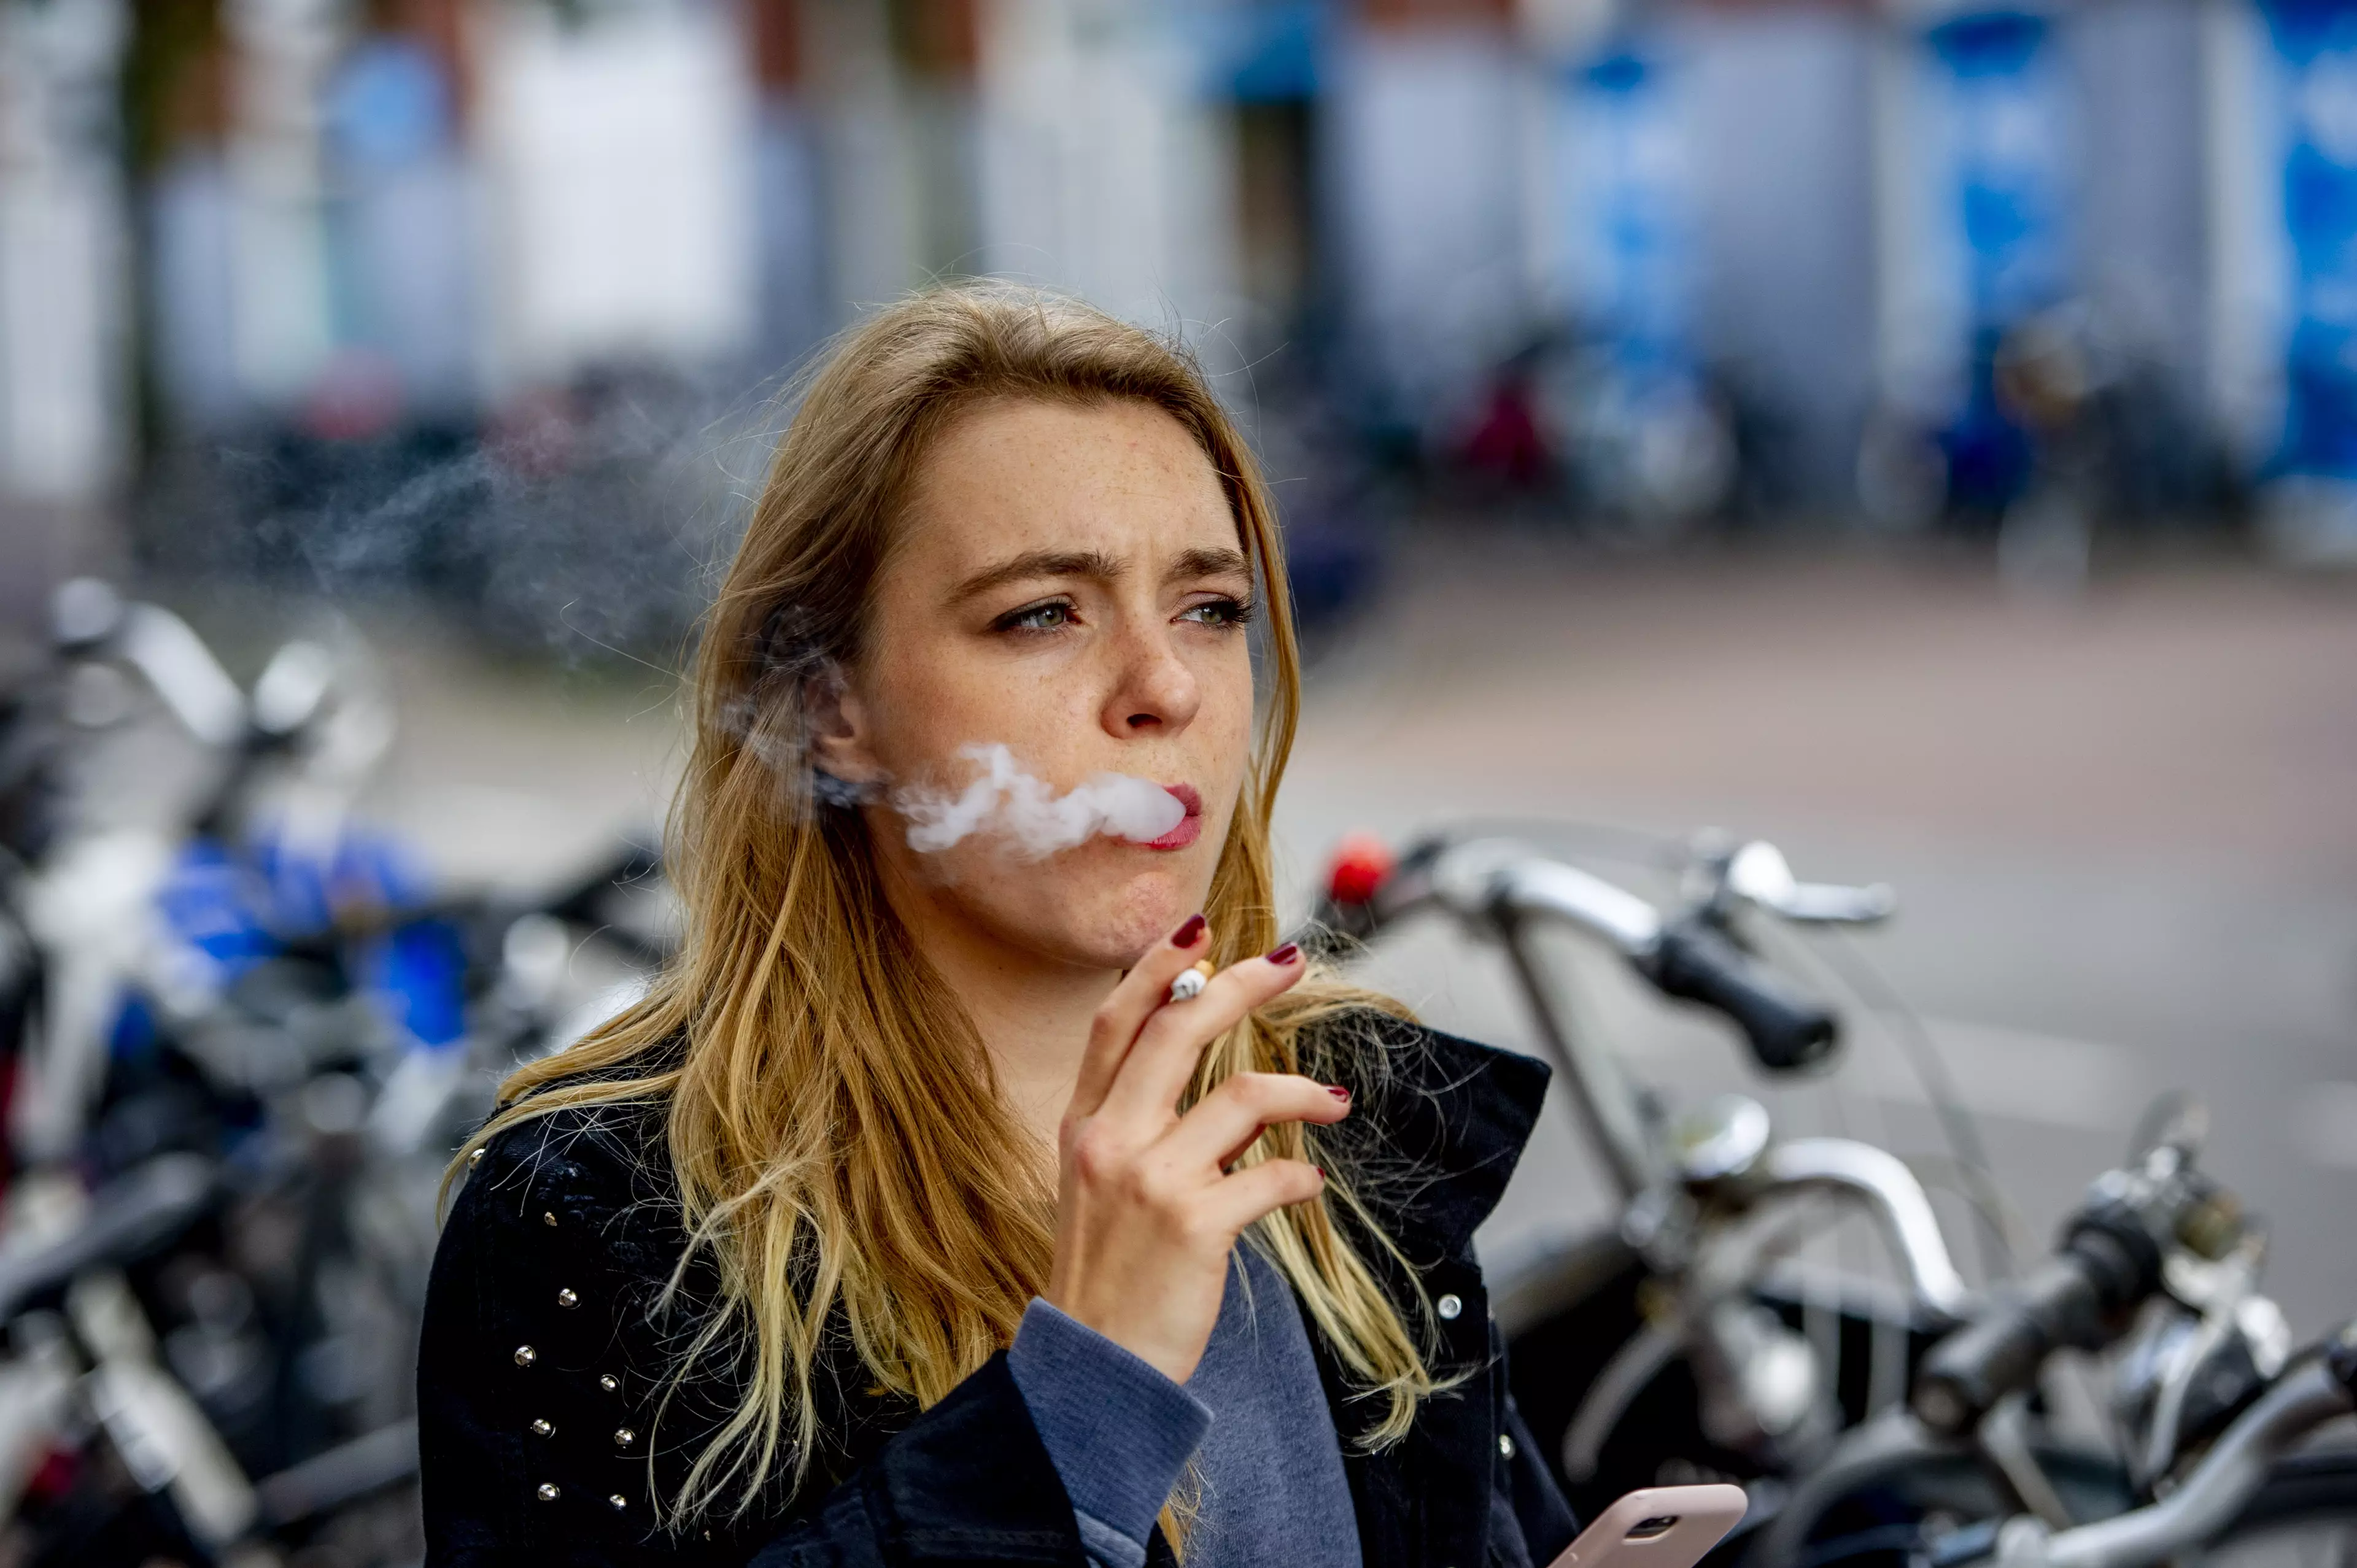 Council housing tenant smokers could be given e-cigarettes.